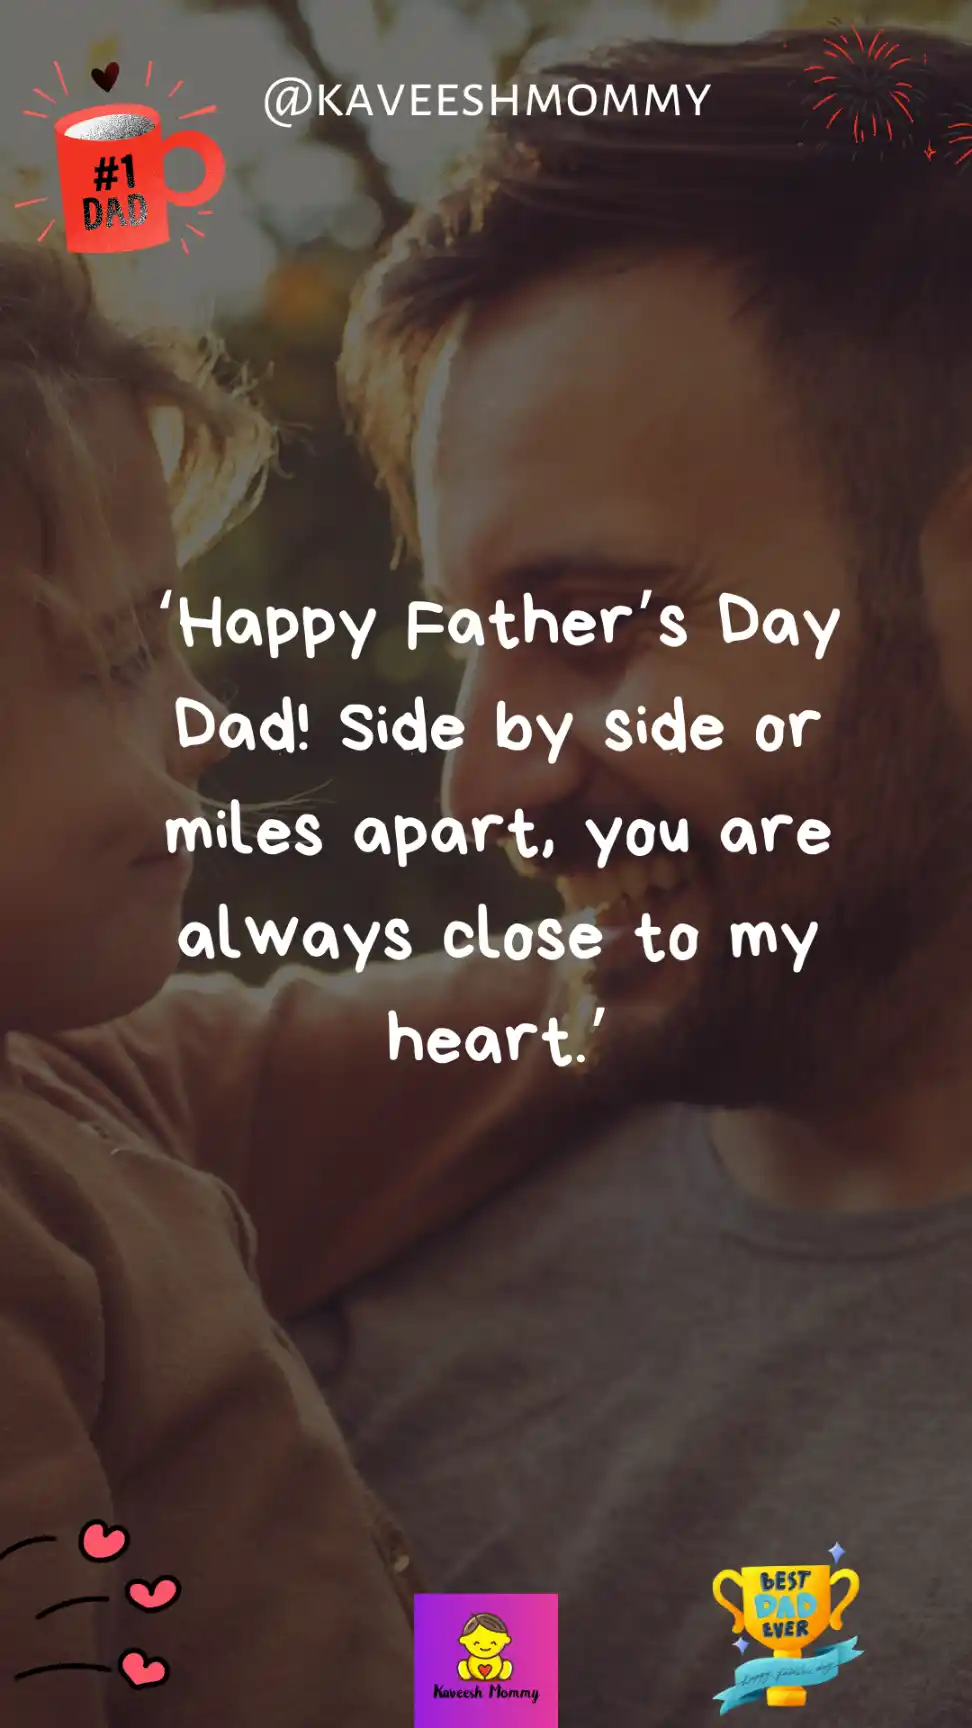 fathers day wishes from daughter-‘Happy Father’s Day Dad! Side by side or miles apart, you are always close to my heart.’